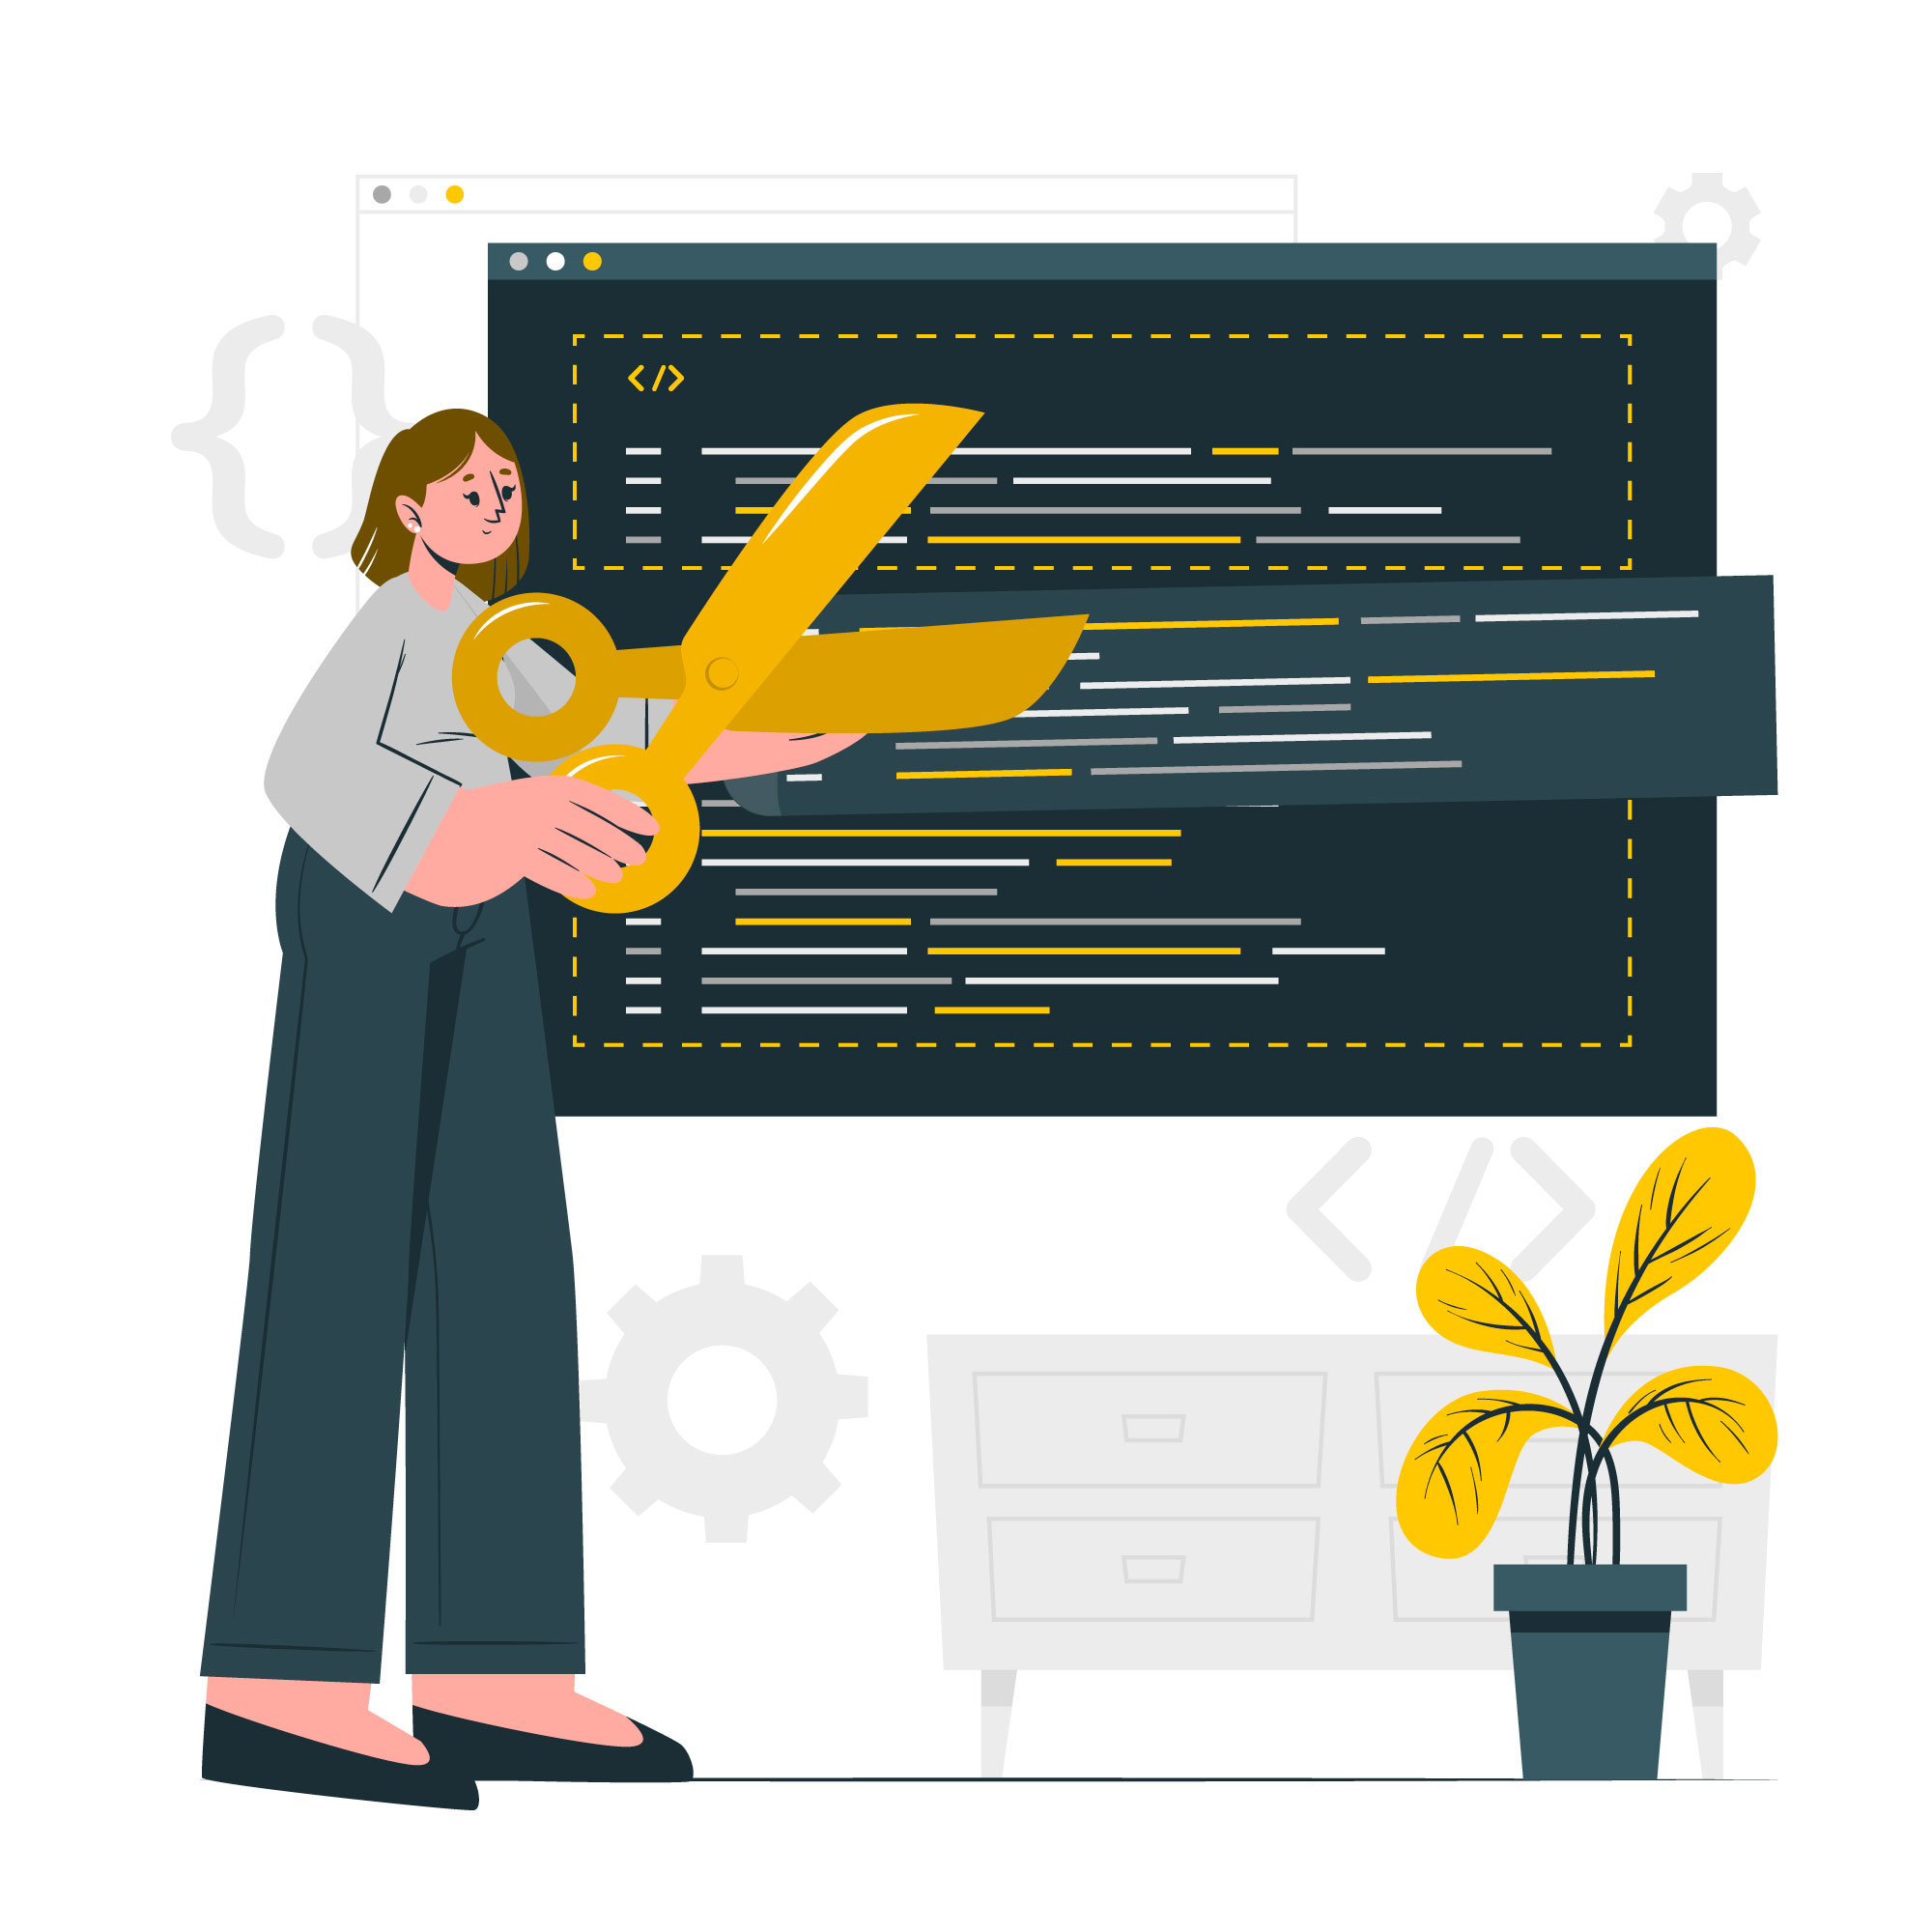 abstract illustration depicting a girl editing code